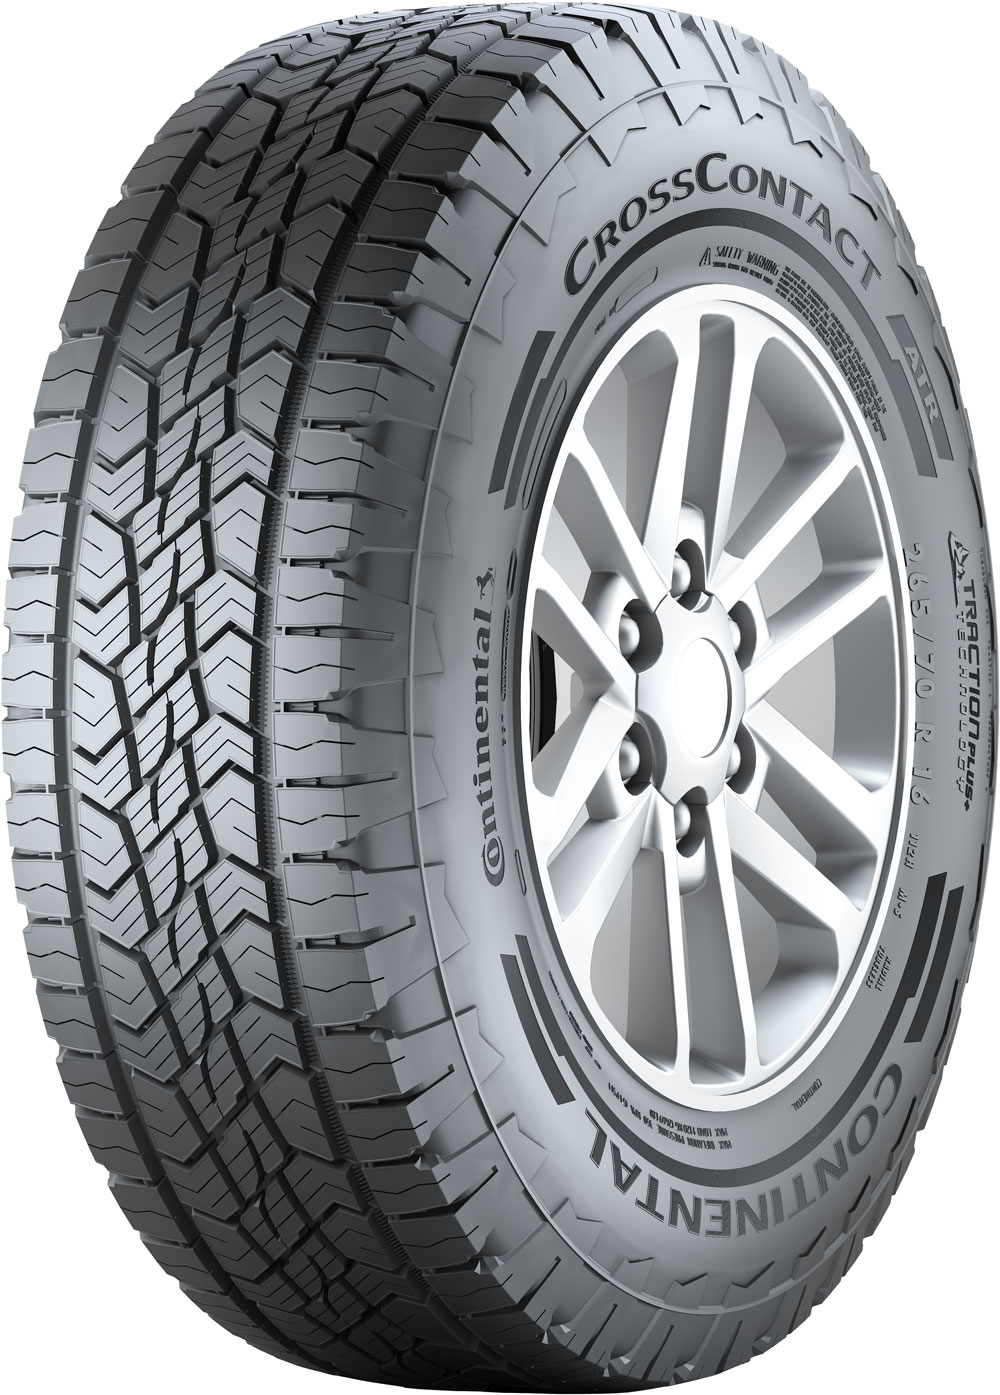 Anvelope auto CONTINENTAL Cross Contact ATR FP 215/65 R16 98